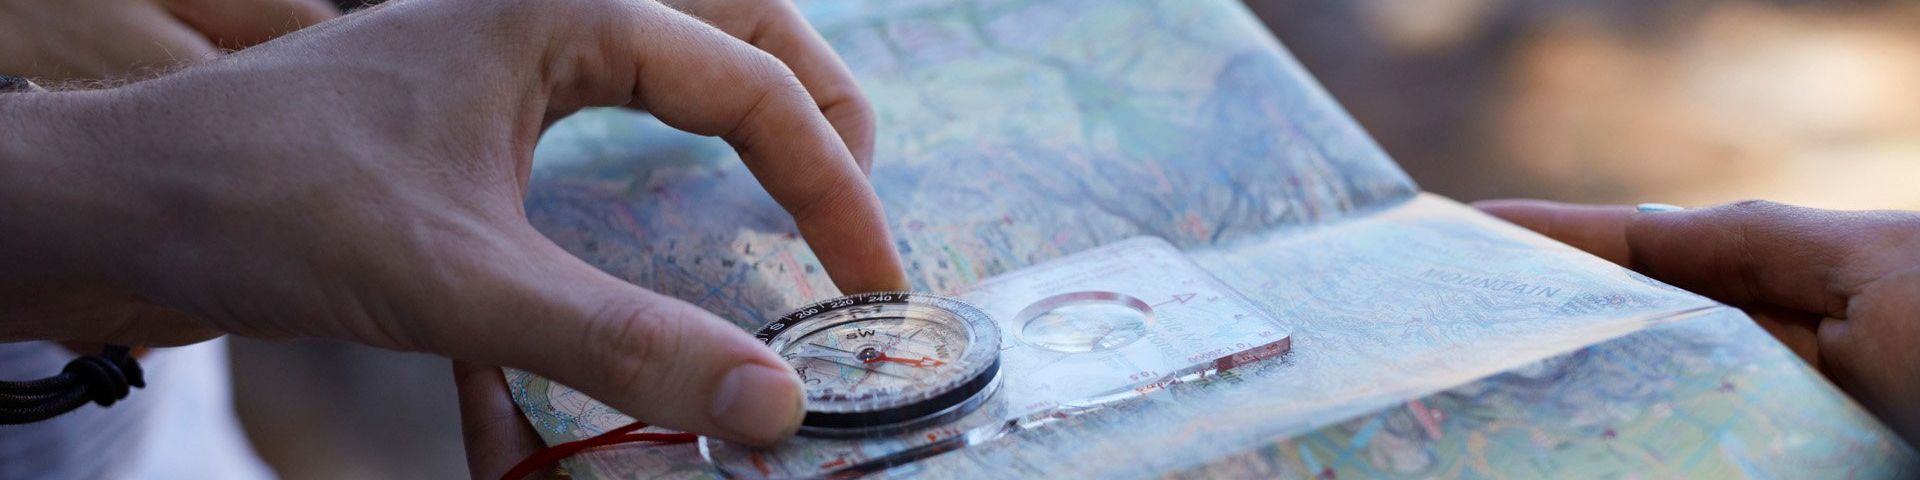 Hands, holding a compass over a map